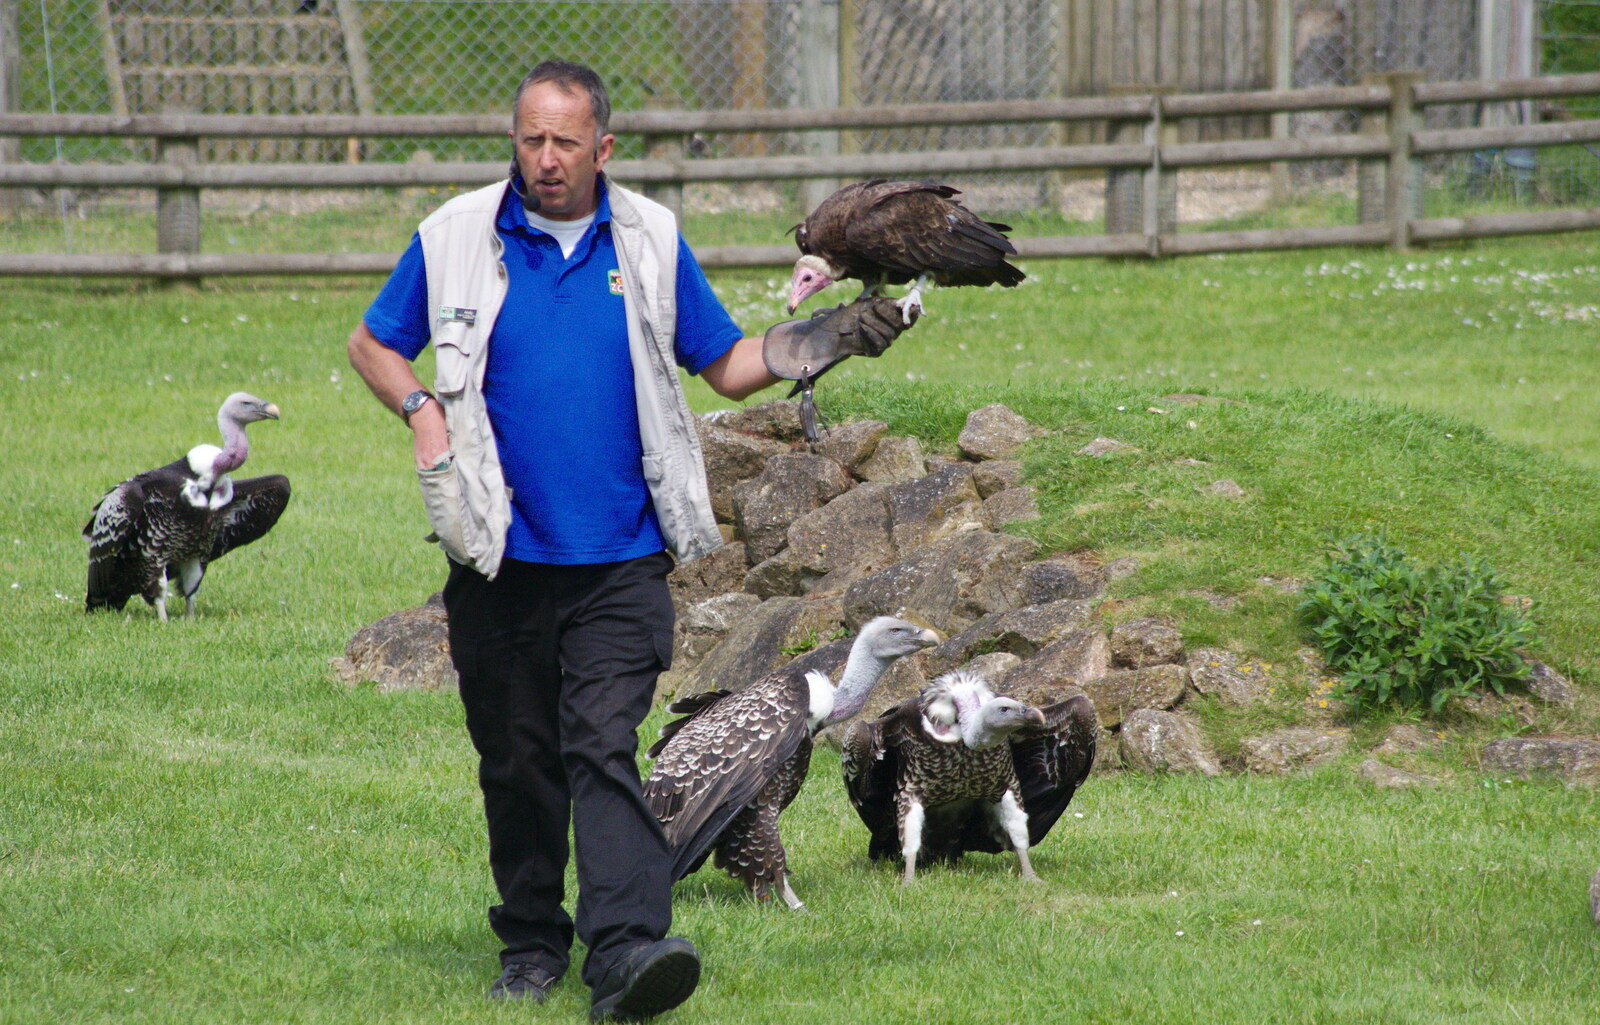 It's the vultures' turn in the spotlight from A Birthday Trip to the Zoo, Banham, Norfolk - 26th May 2014